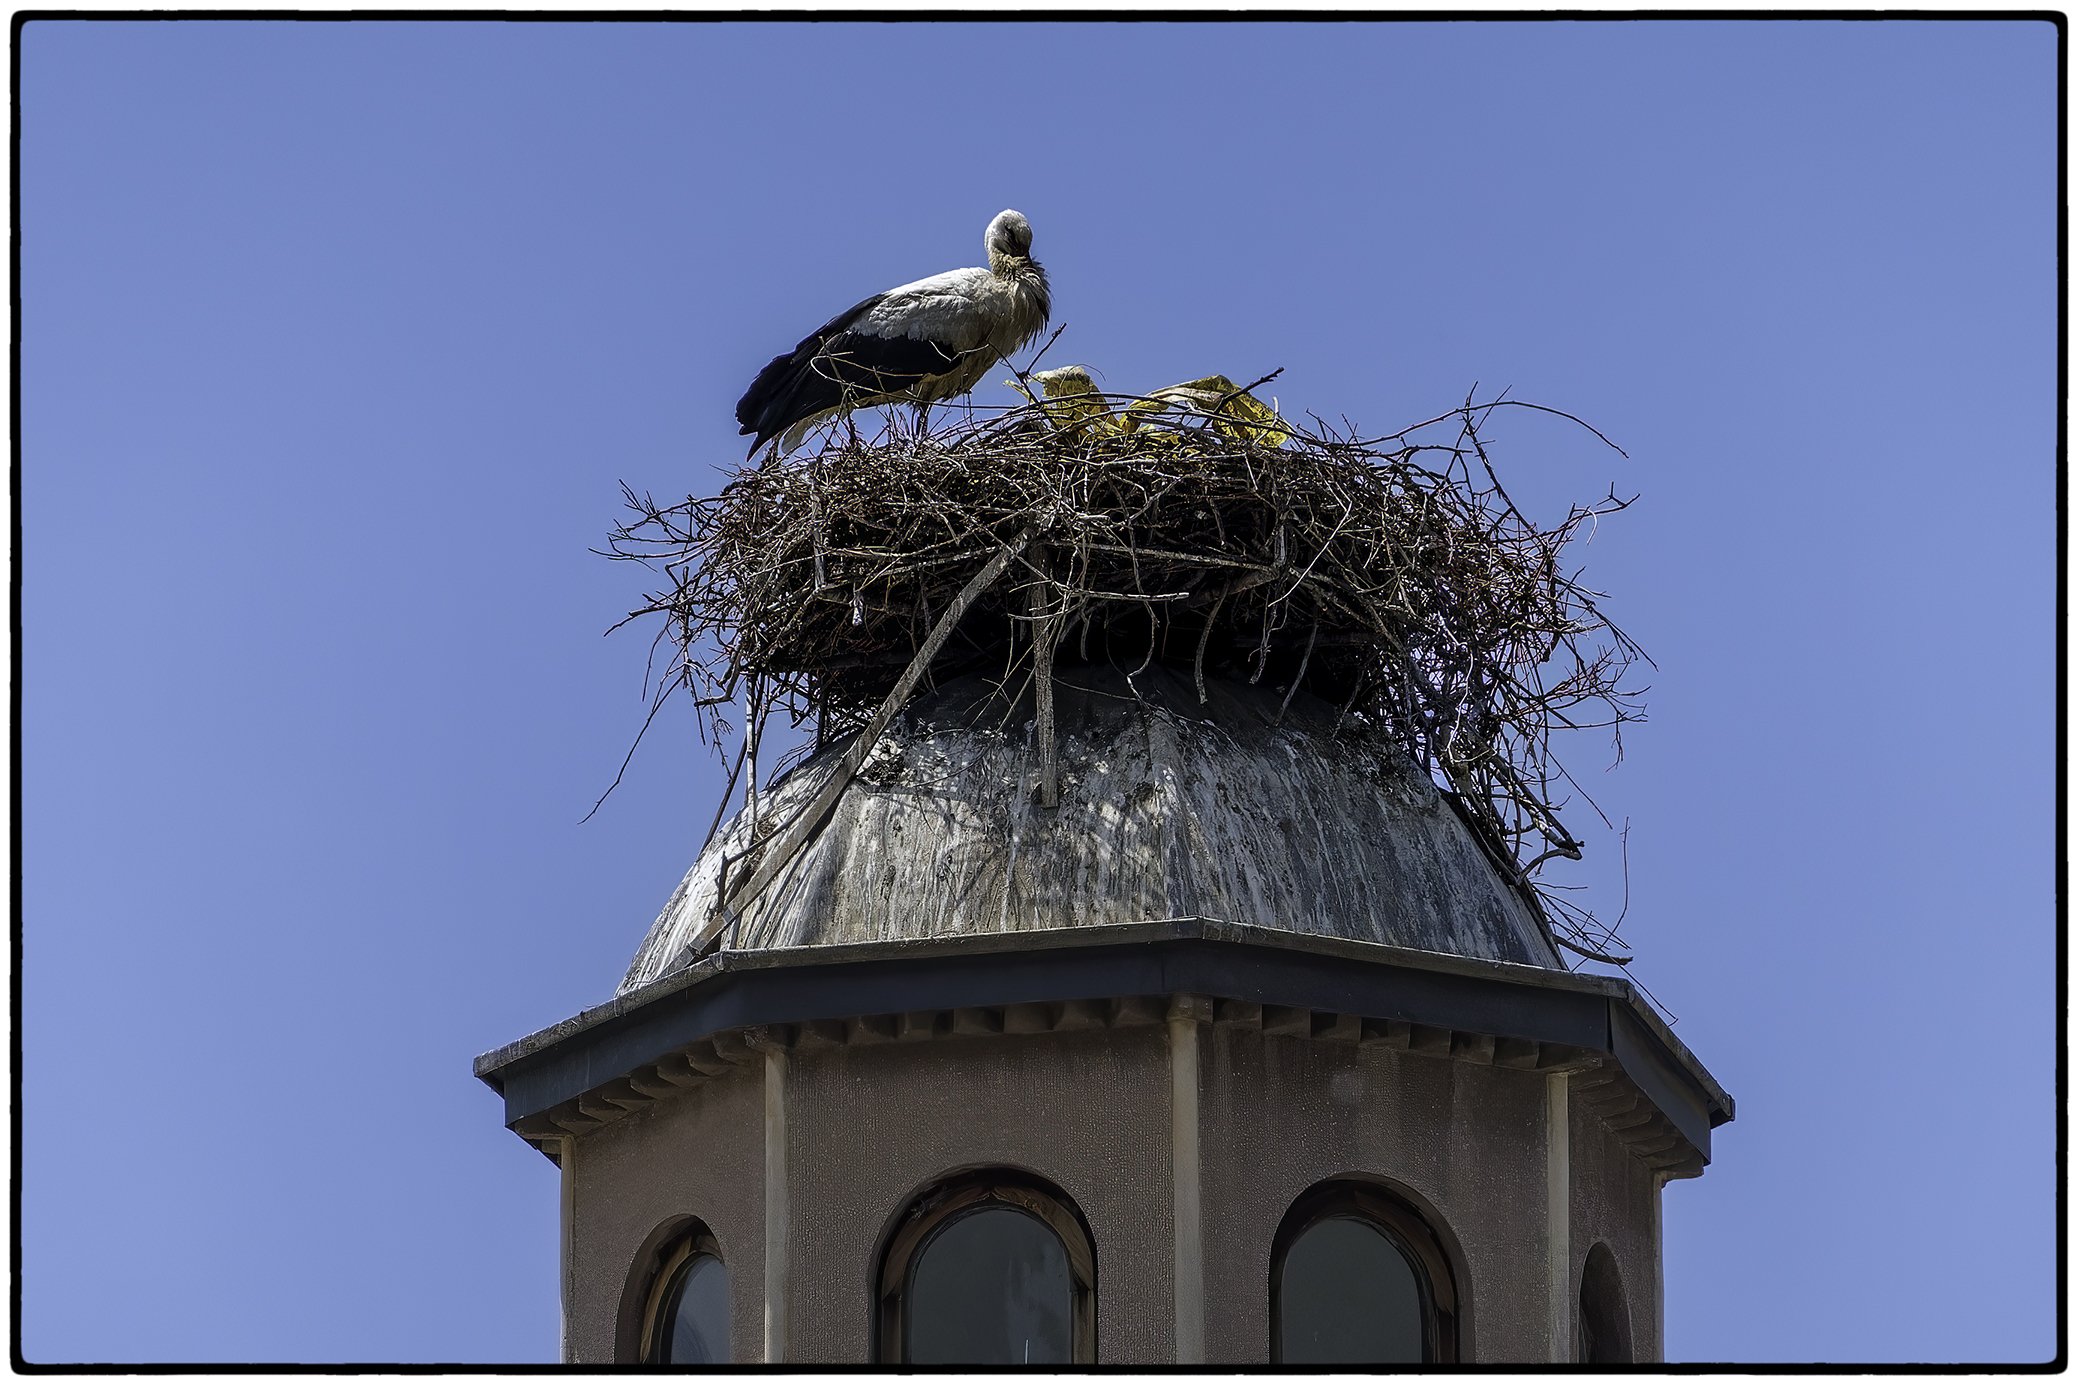 Storks are mating now